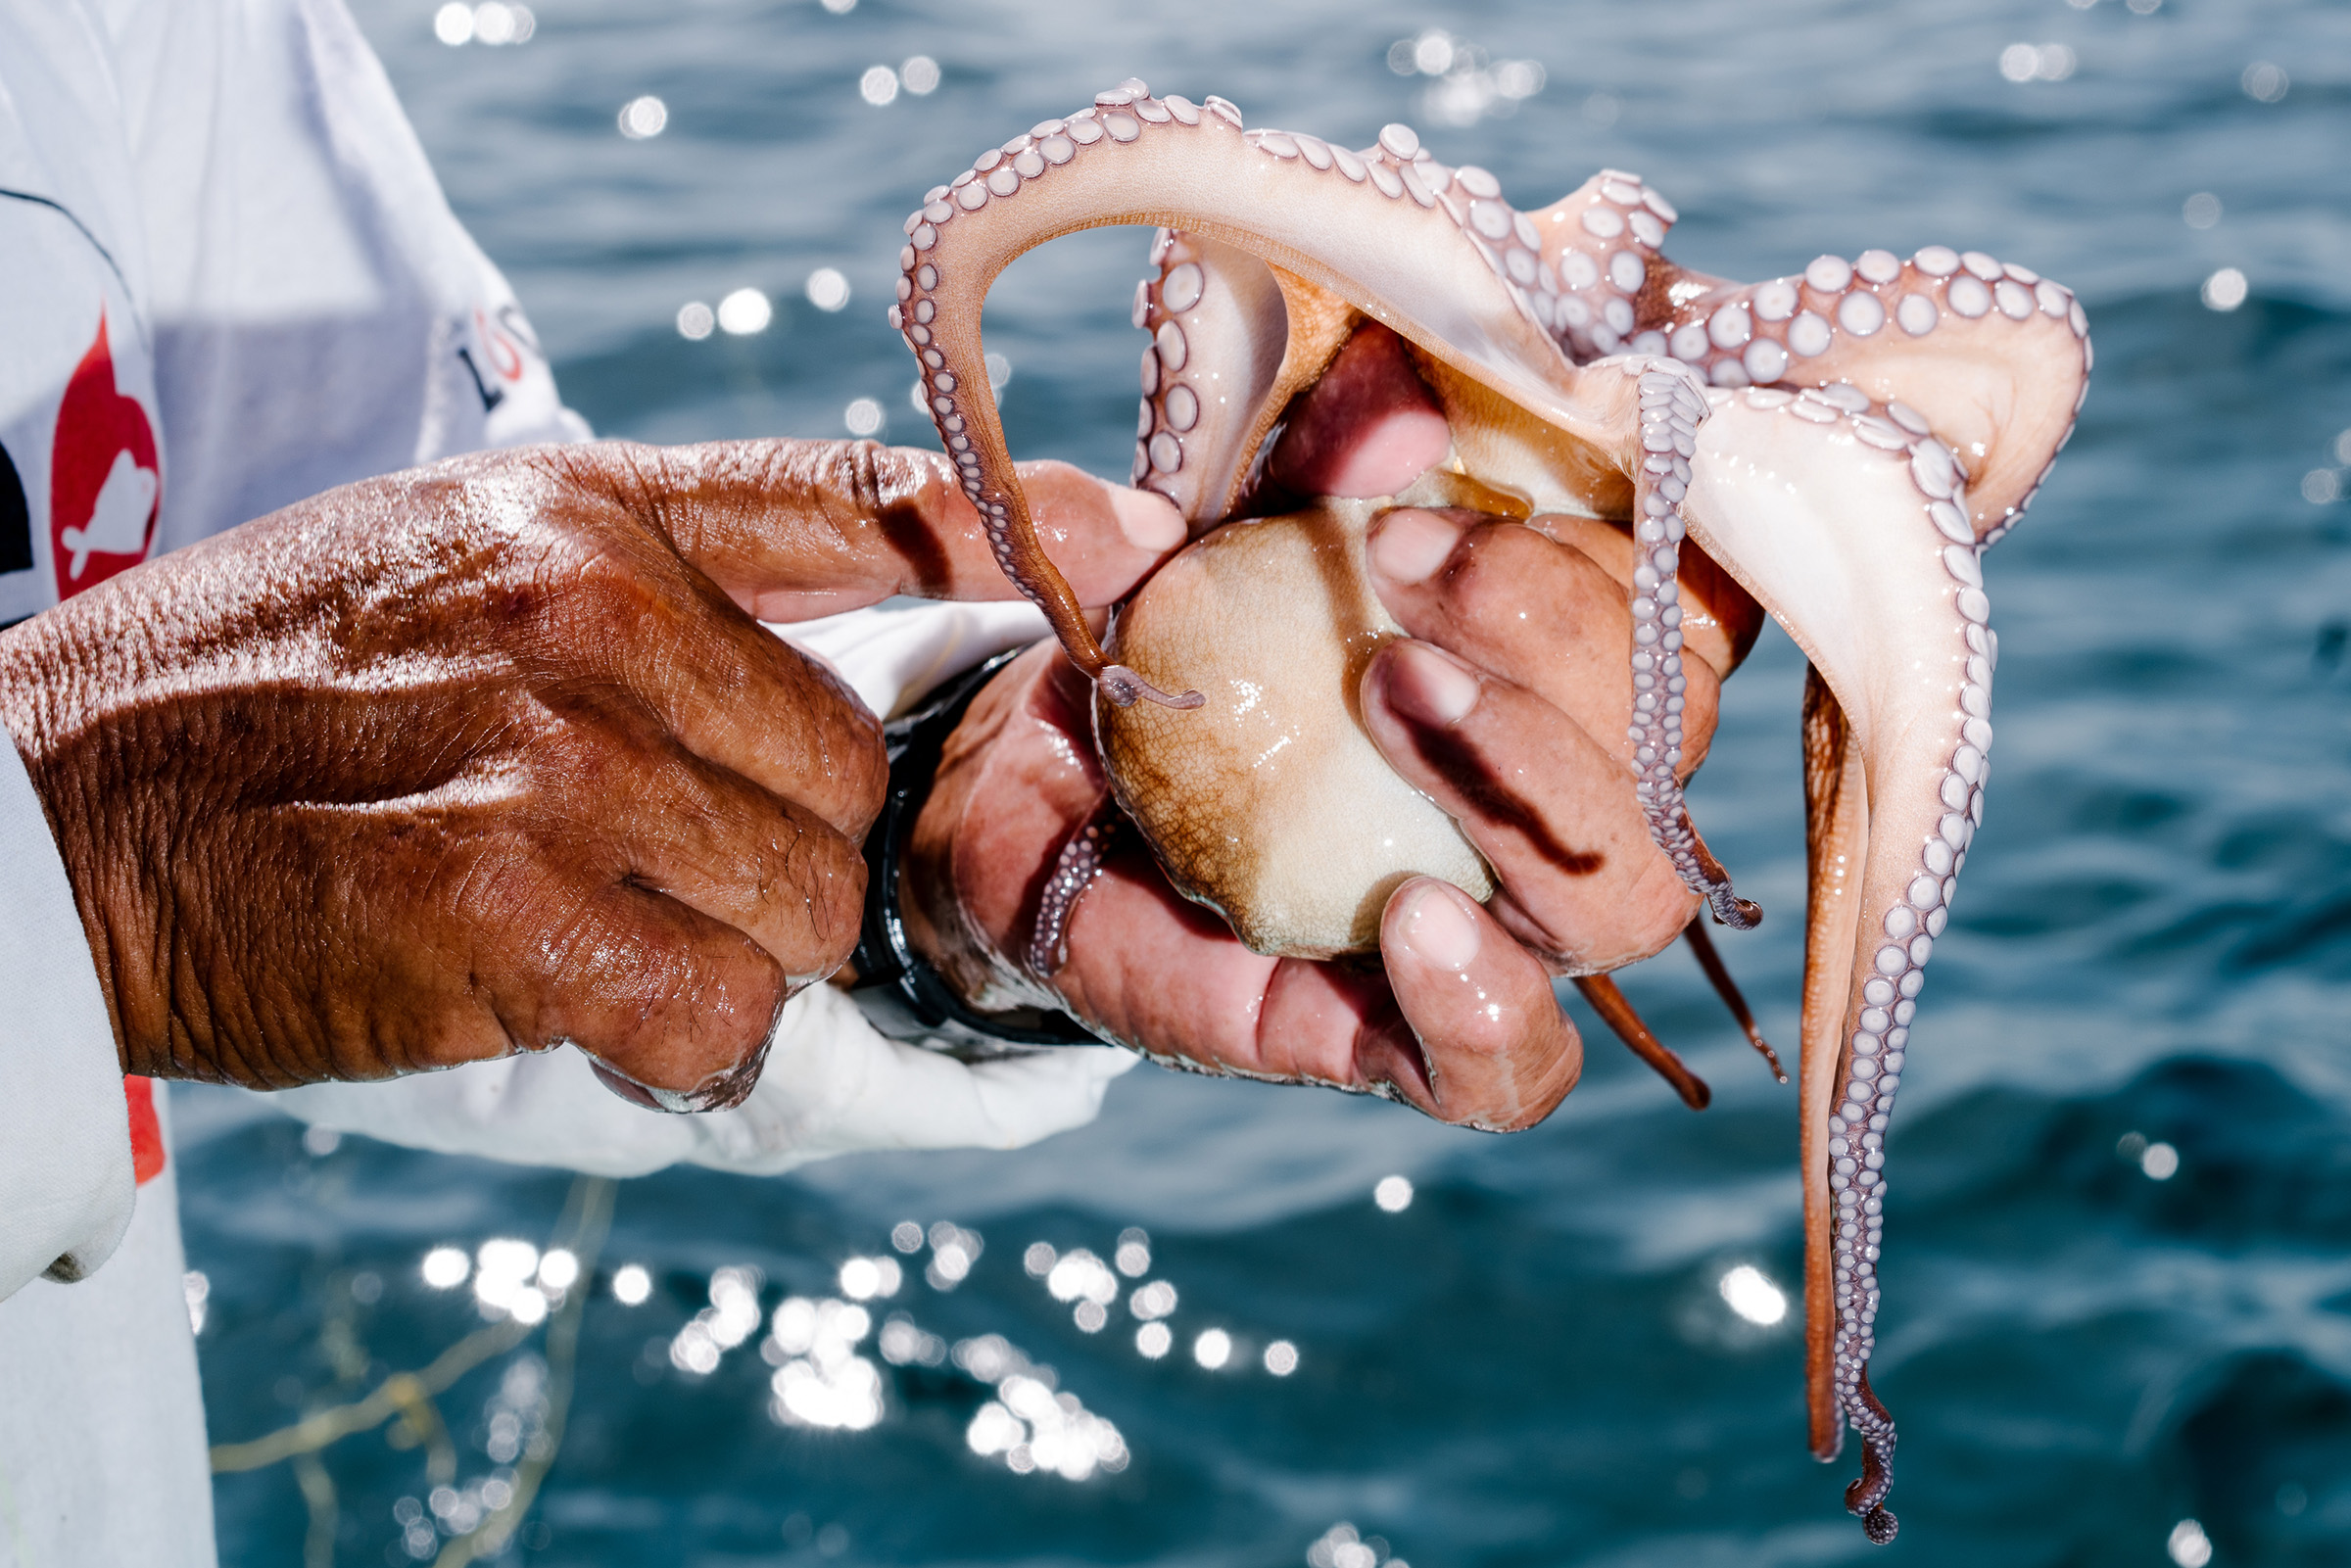 Octopuses raised in captivity, like this one photographed on Aug. 6, could save their wild relatives from overfishing. Sept. 2 issue. (Jake Naughton for TIME)